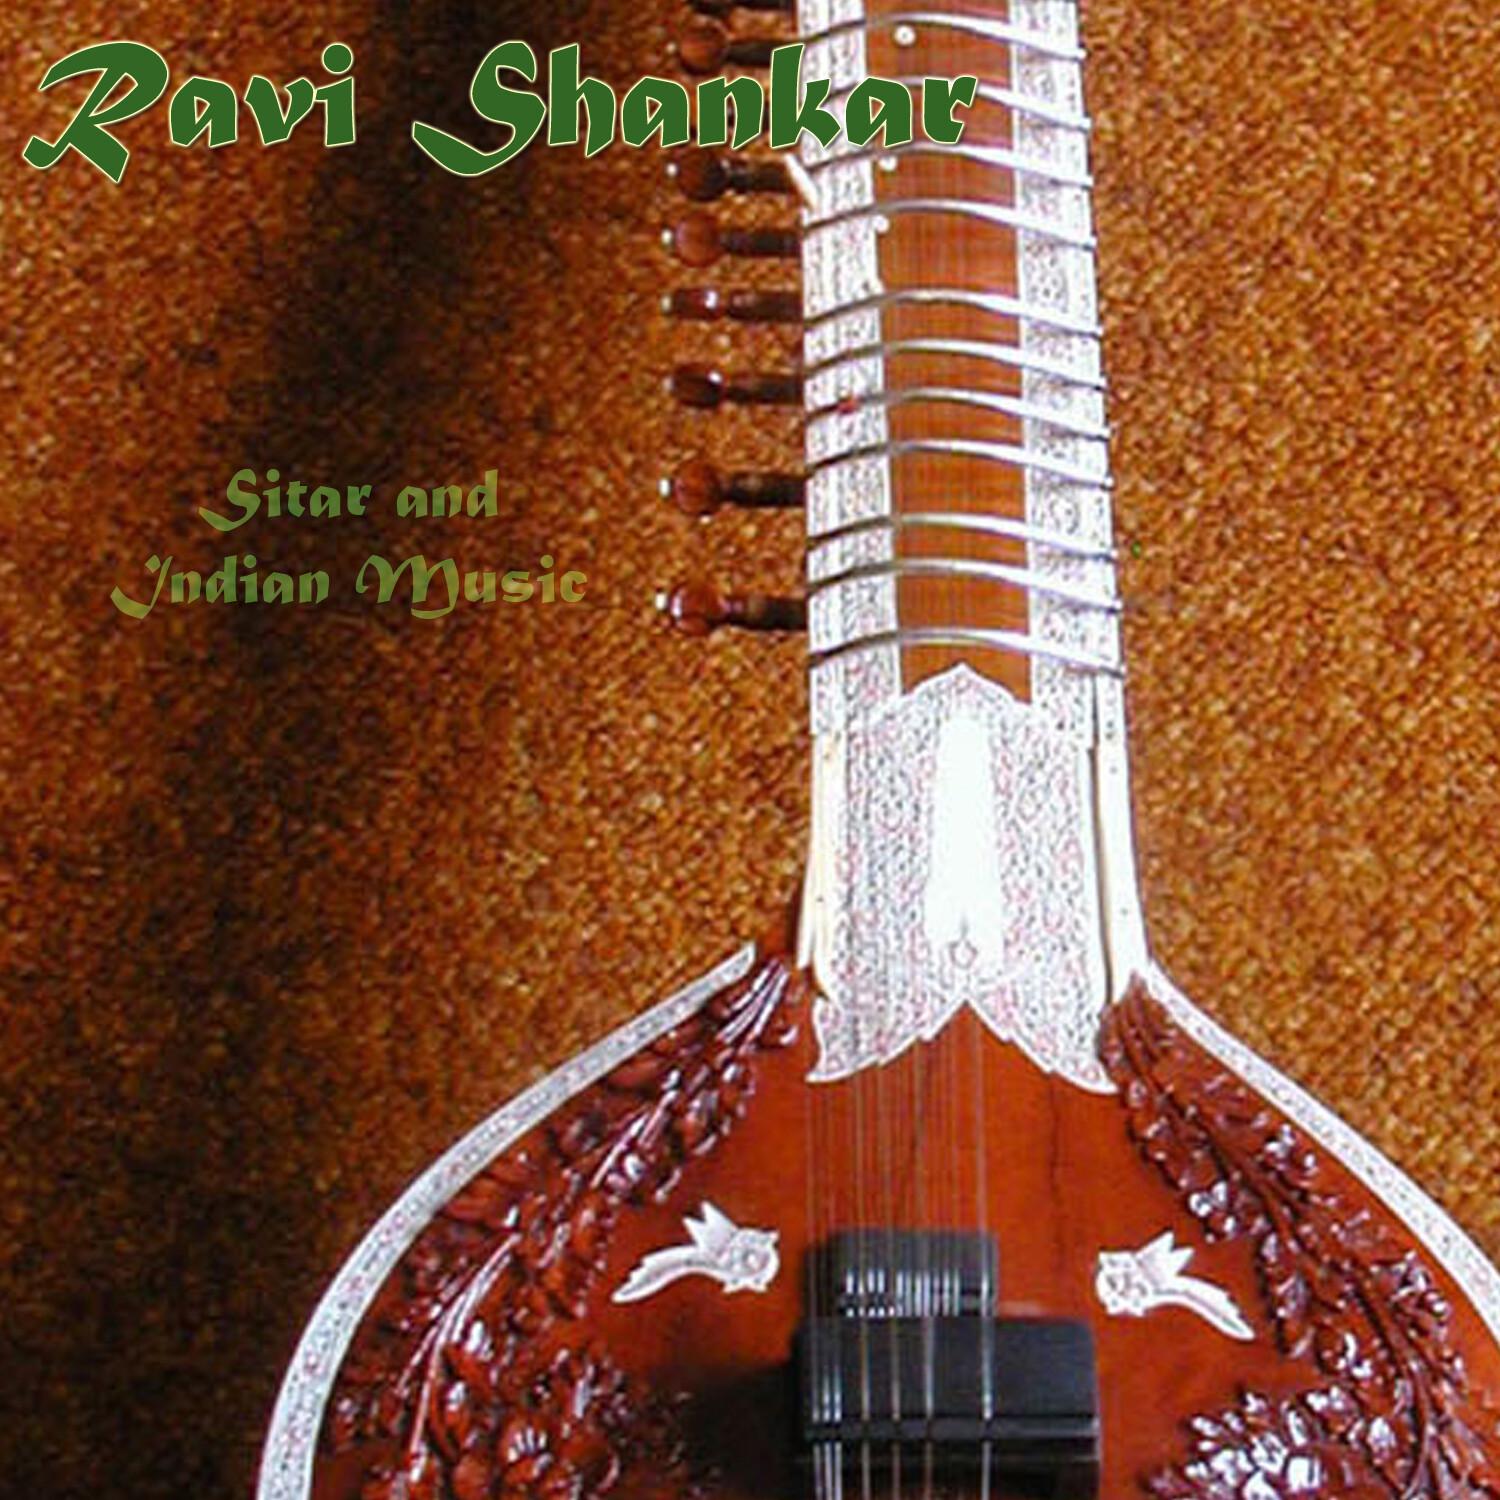 About Sitar and Indian Music